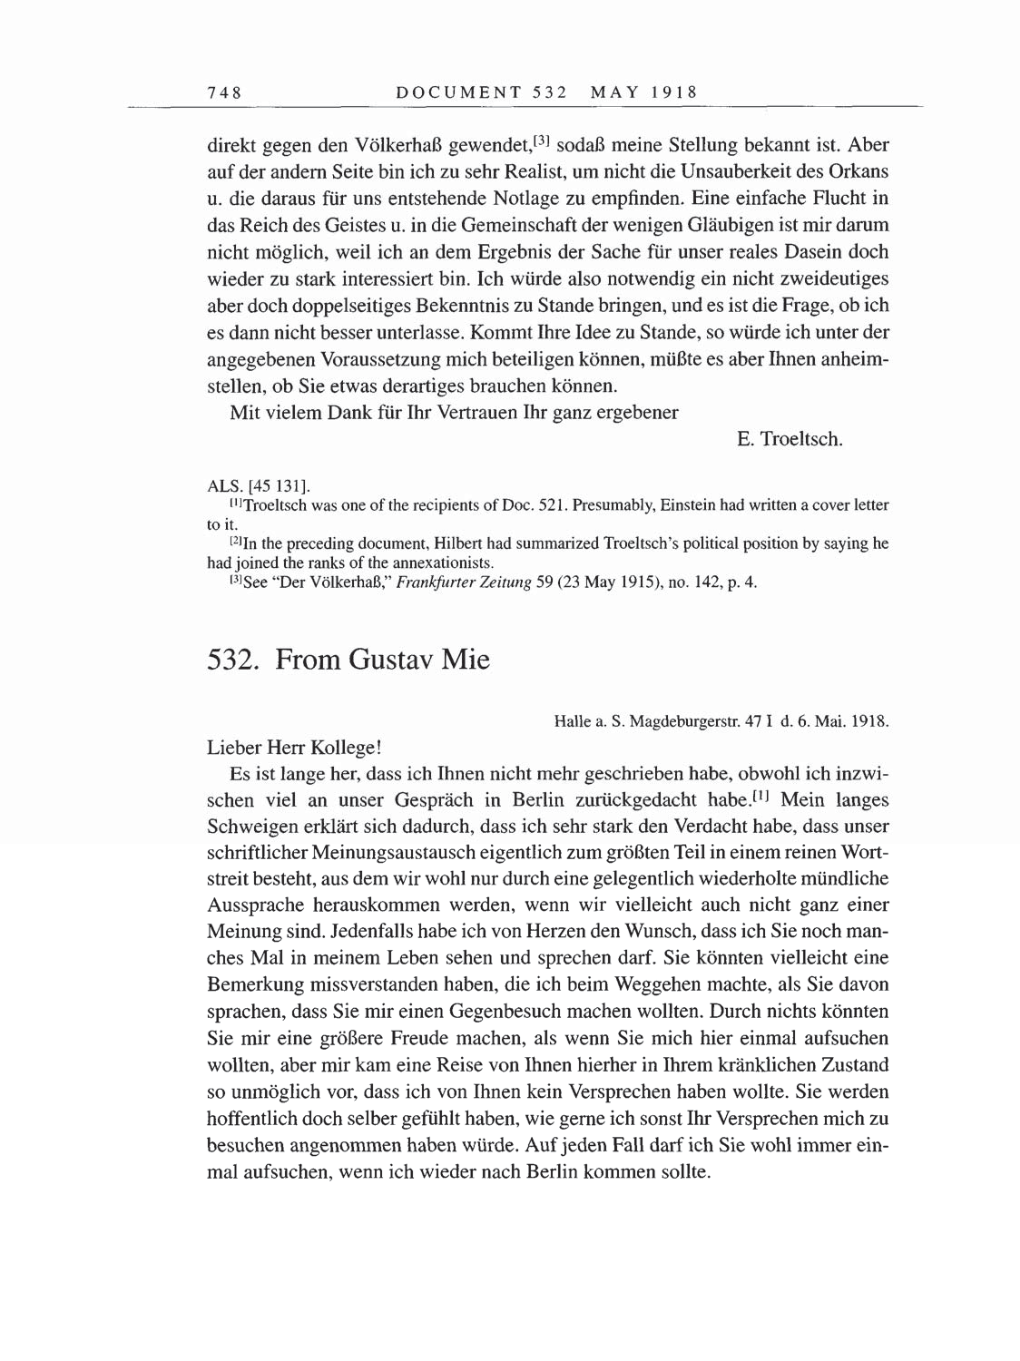 Volume 8, Part B: The Berlin Years: Correspondence 1918 page 748